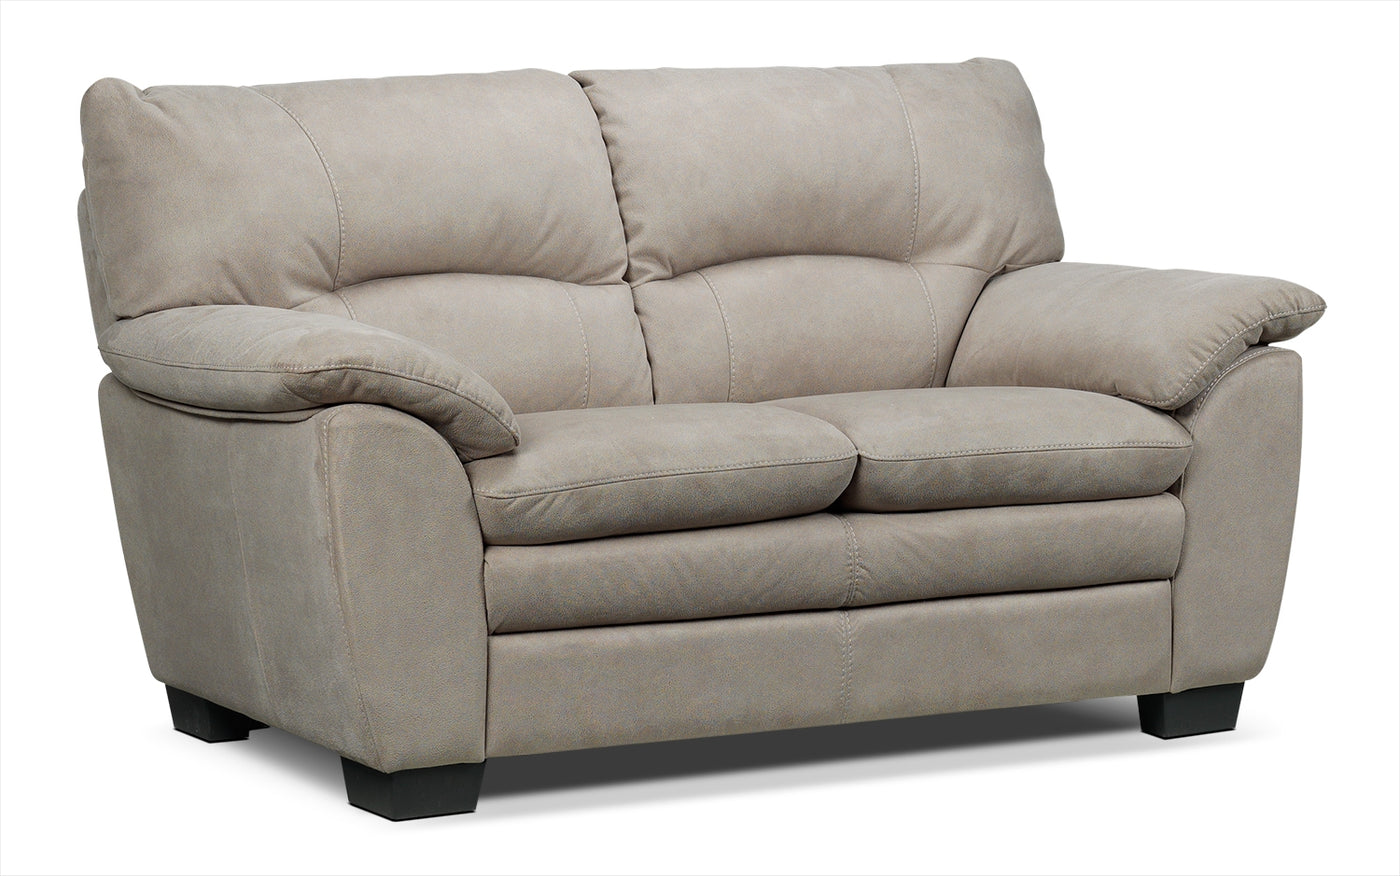 Kelleher Sofa, Loveseat and Chair Set - Silver Grey